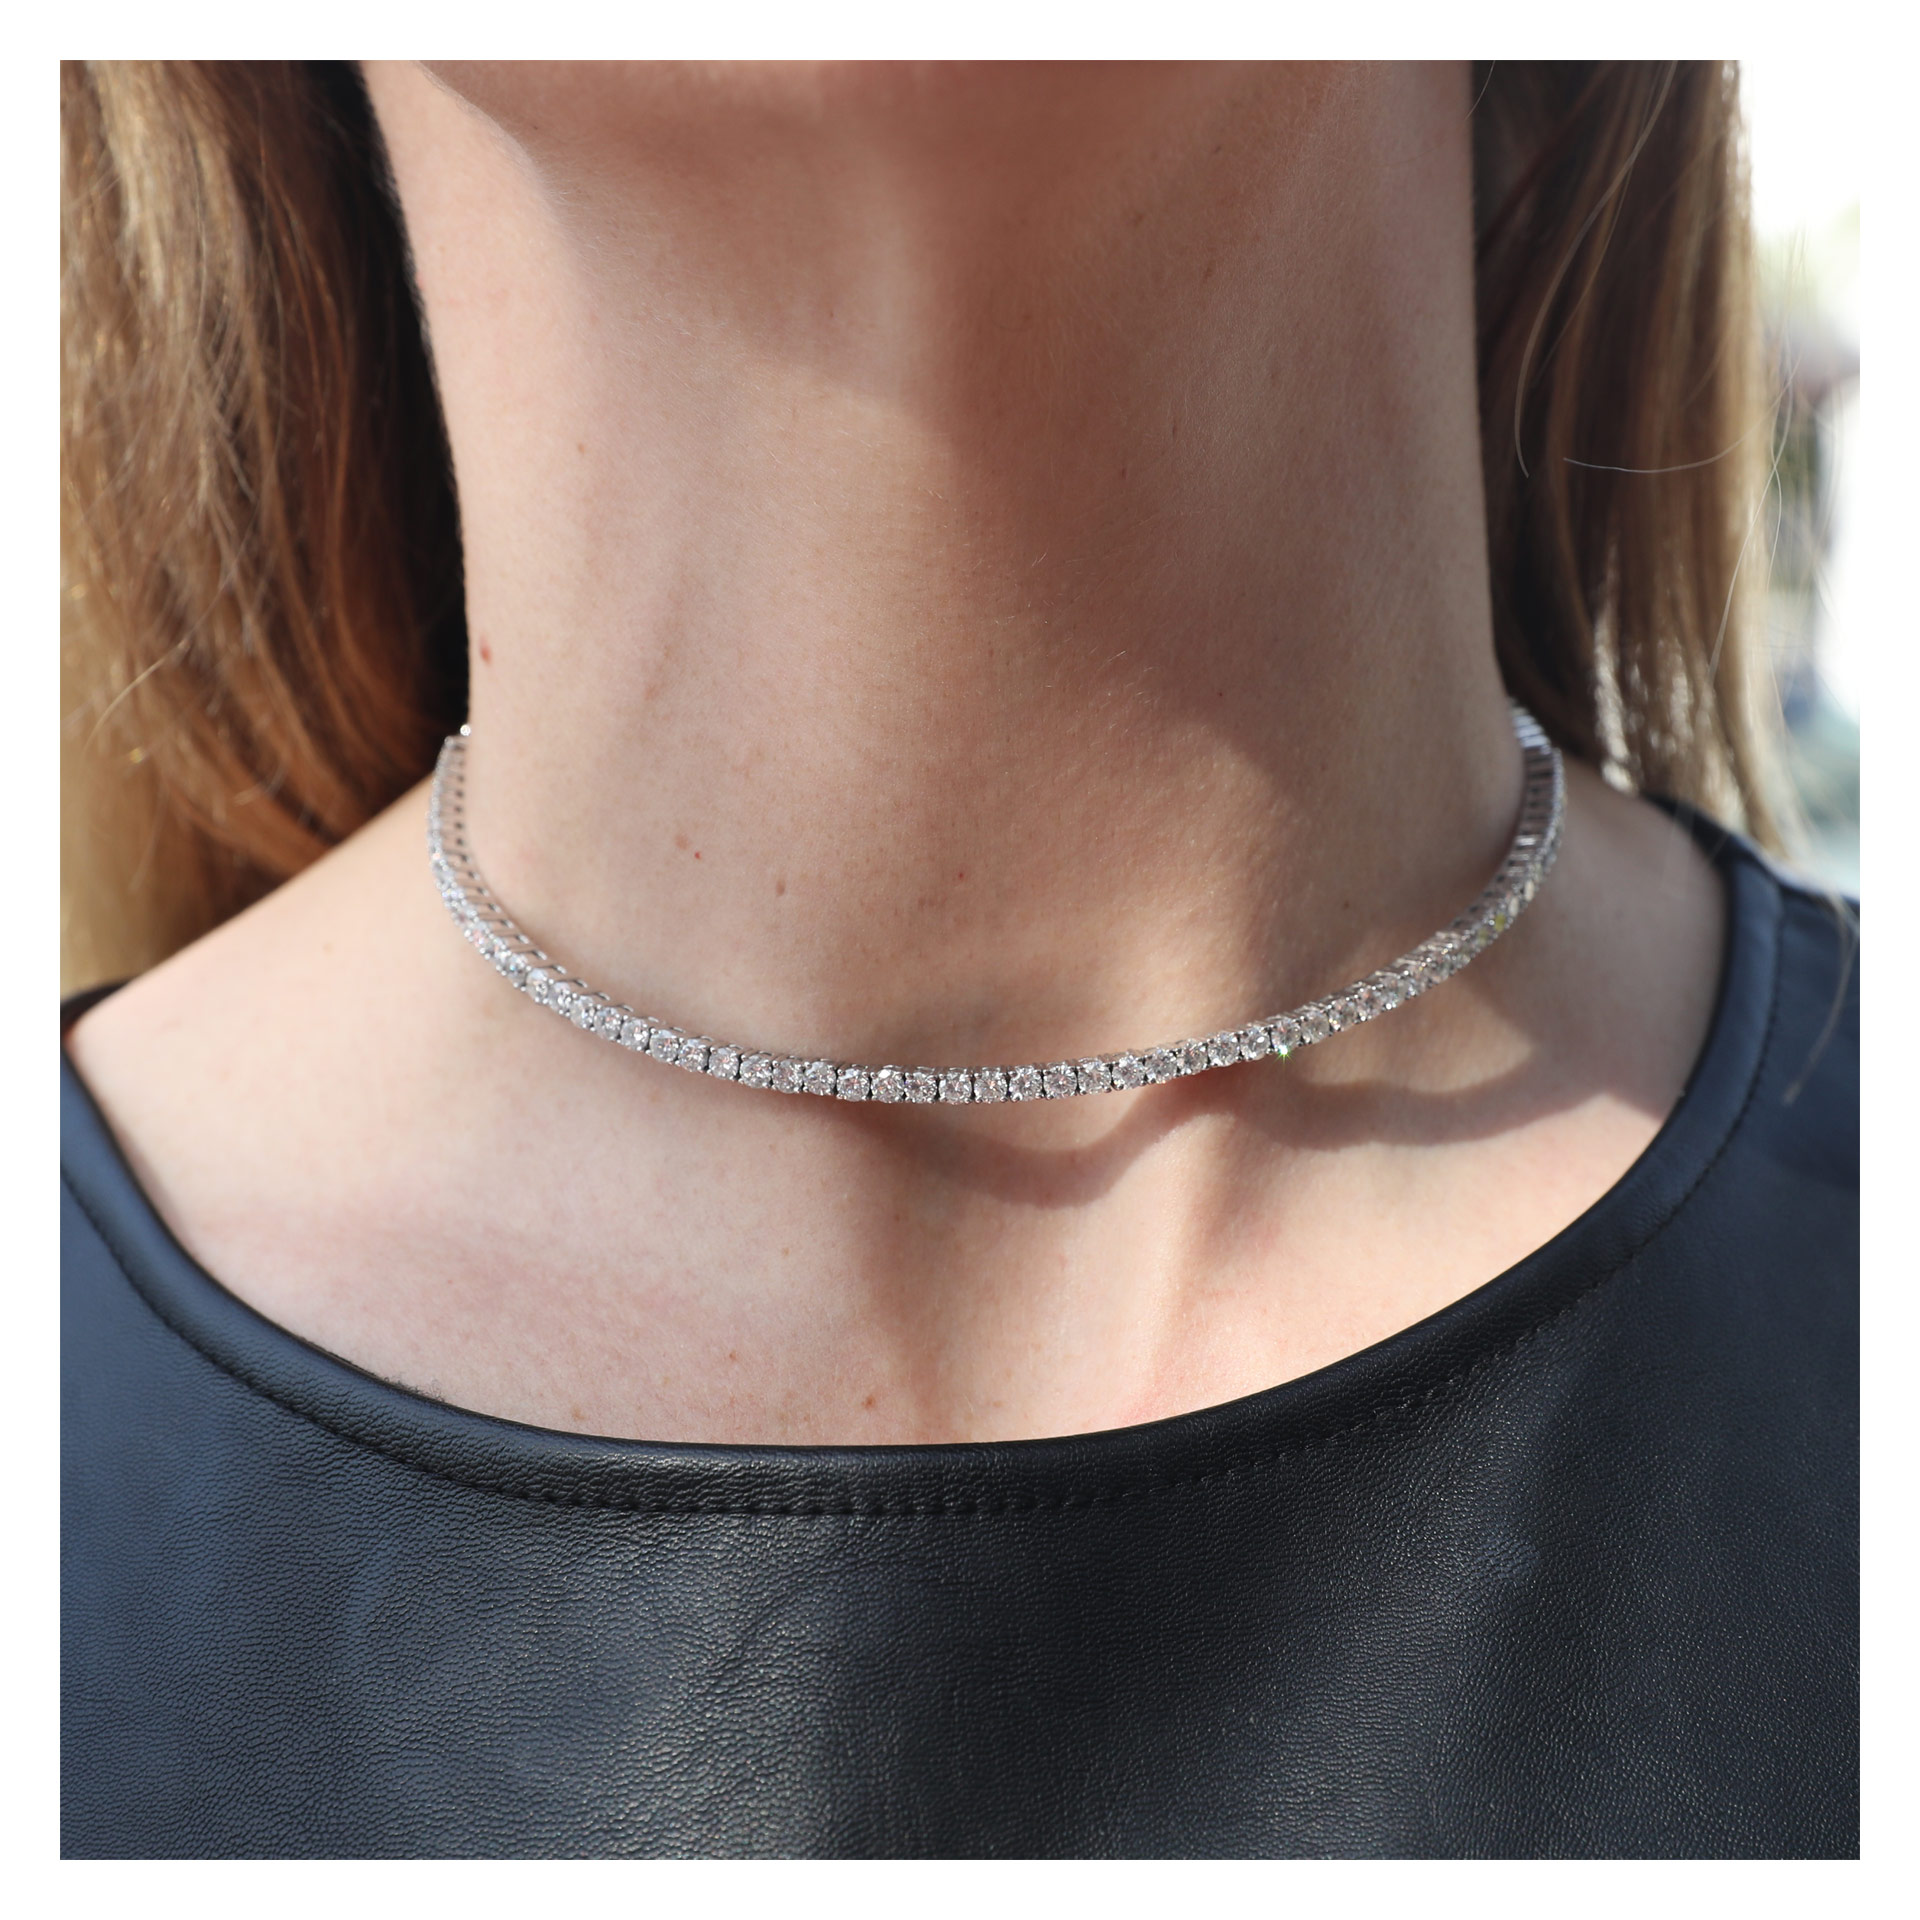 Sparkling diamond choker necklace in 8.39 carats of white clean diamonds